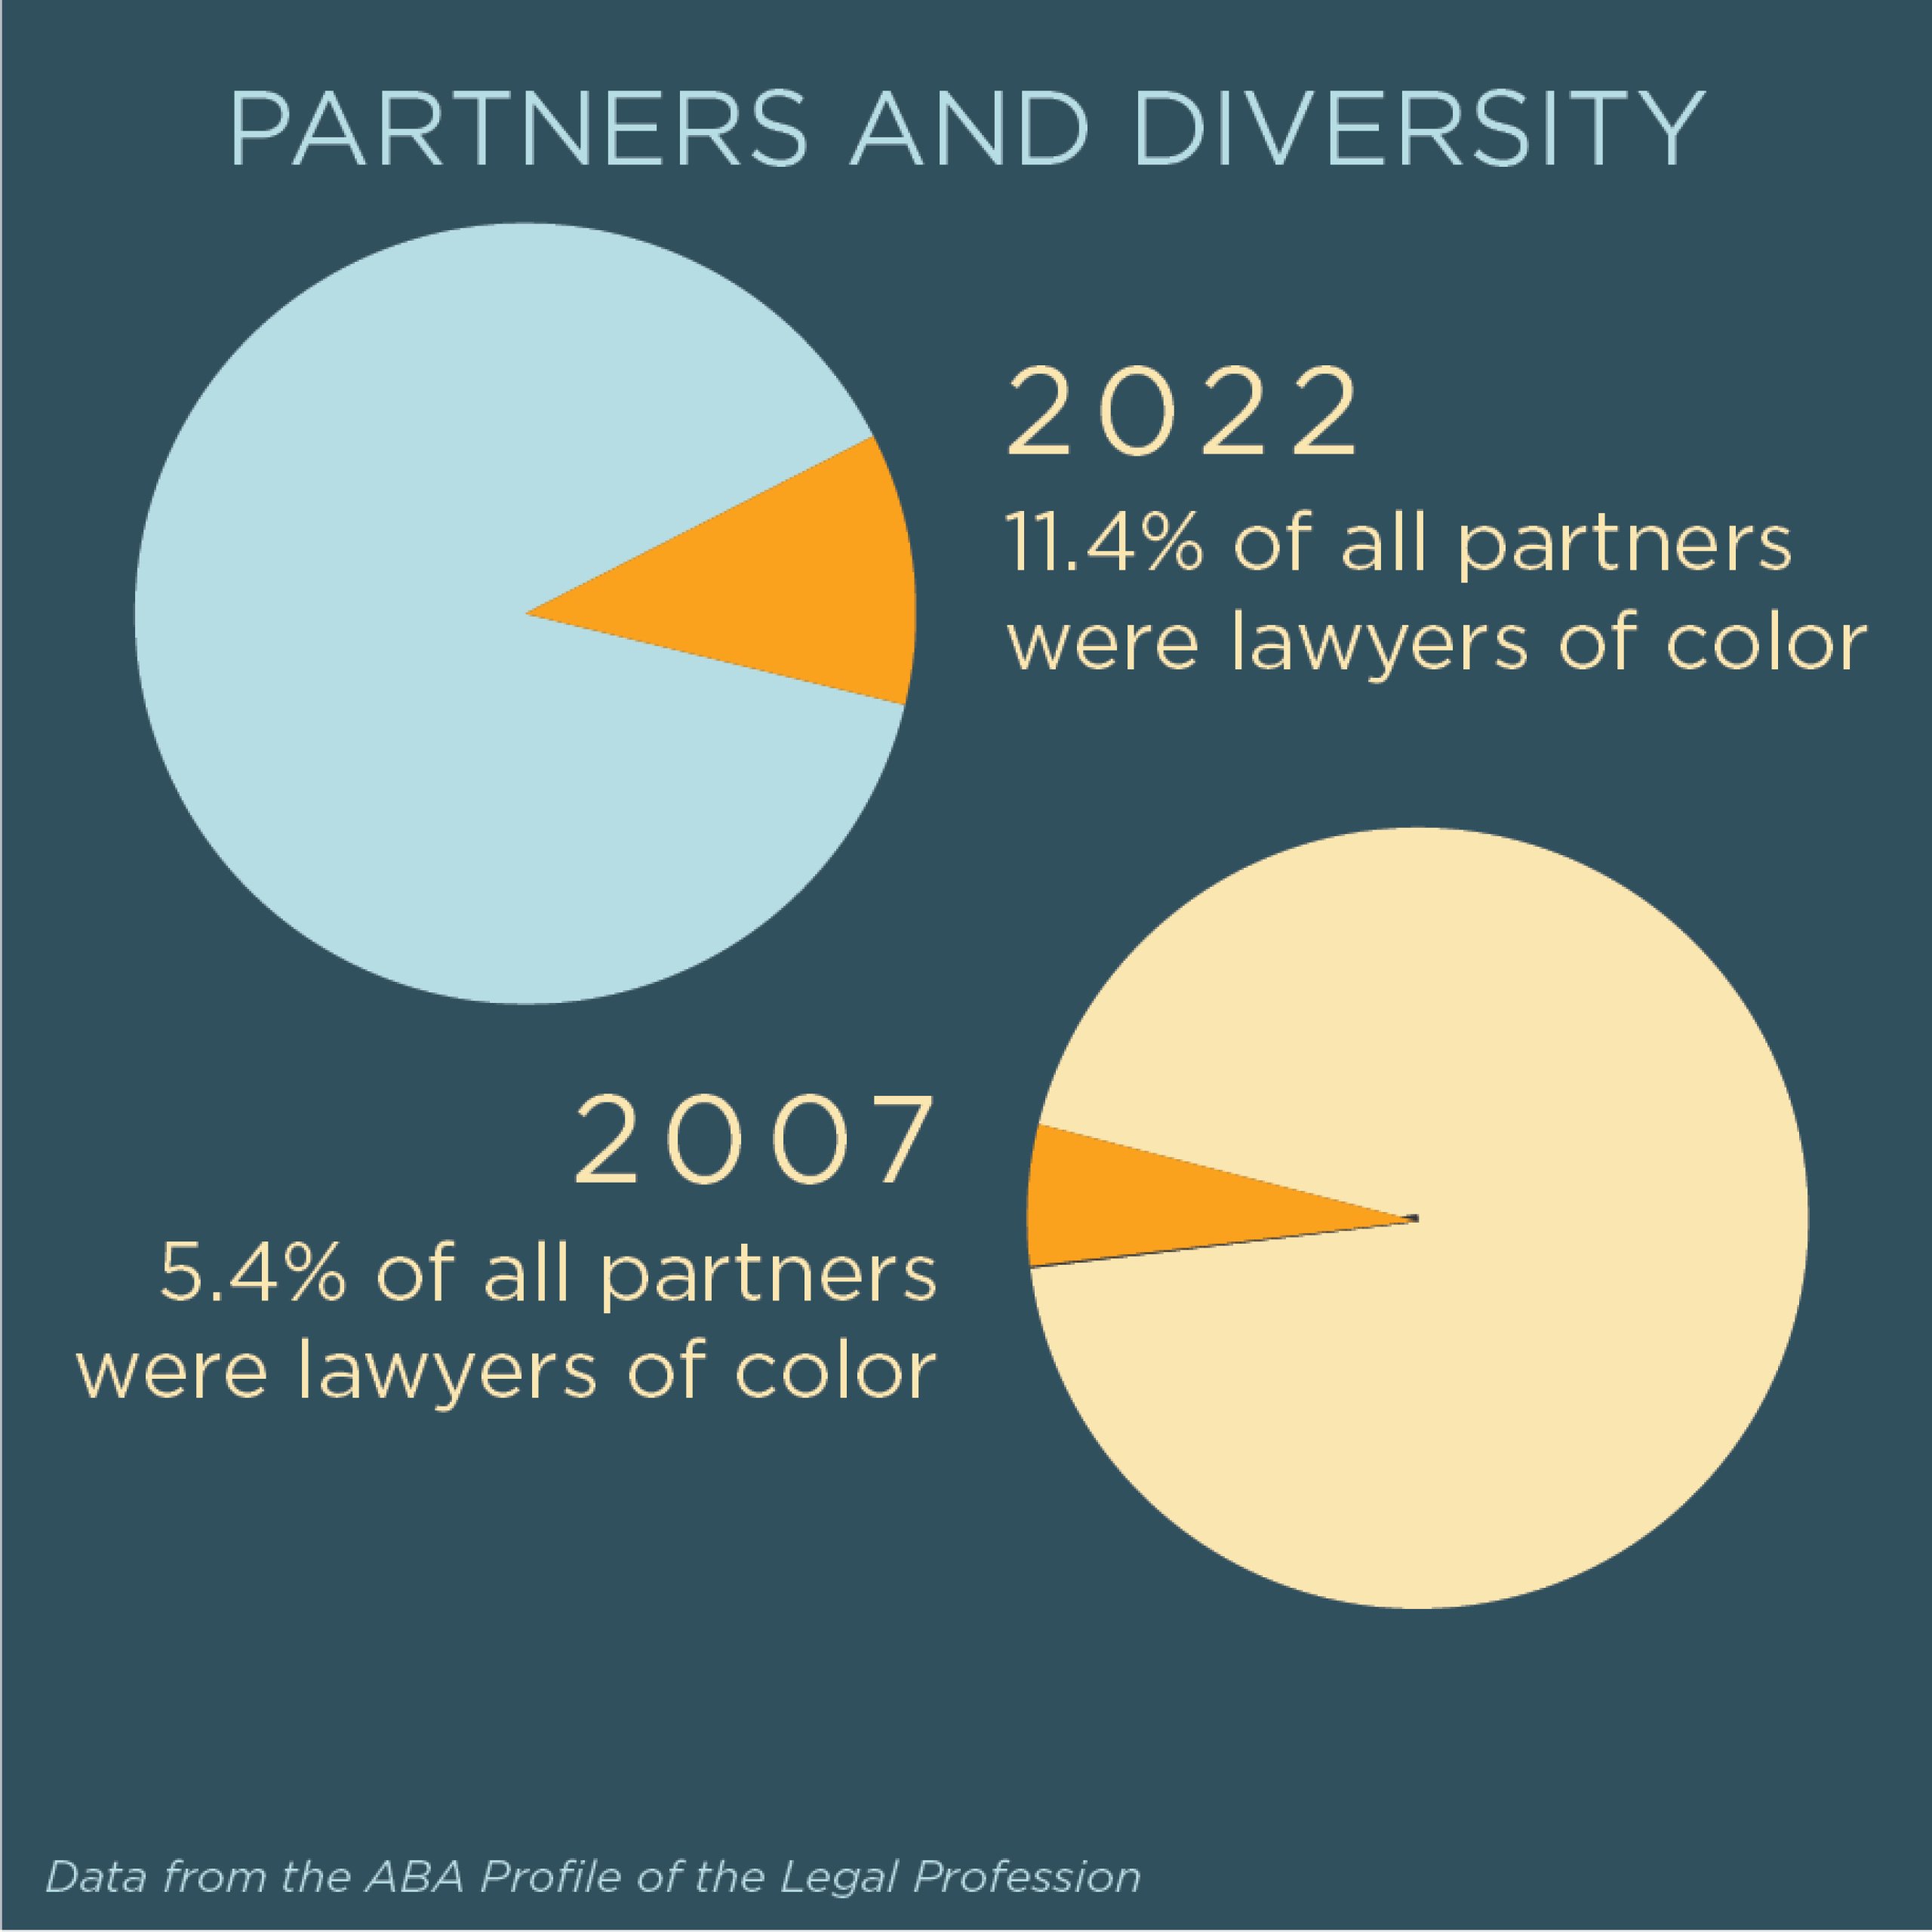 Partners and Diversity